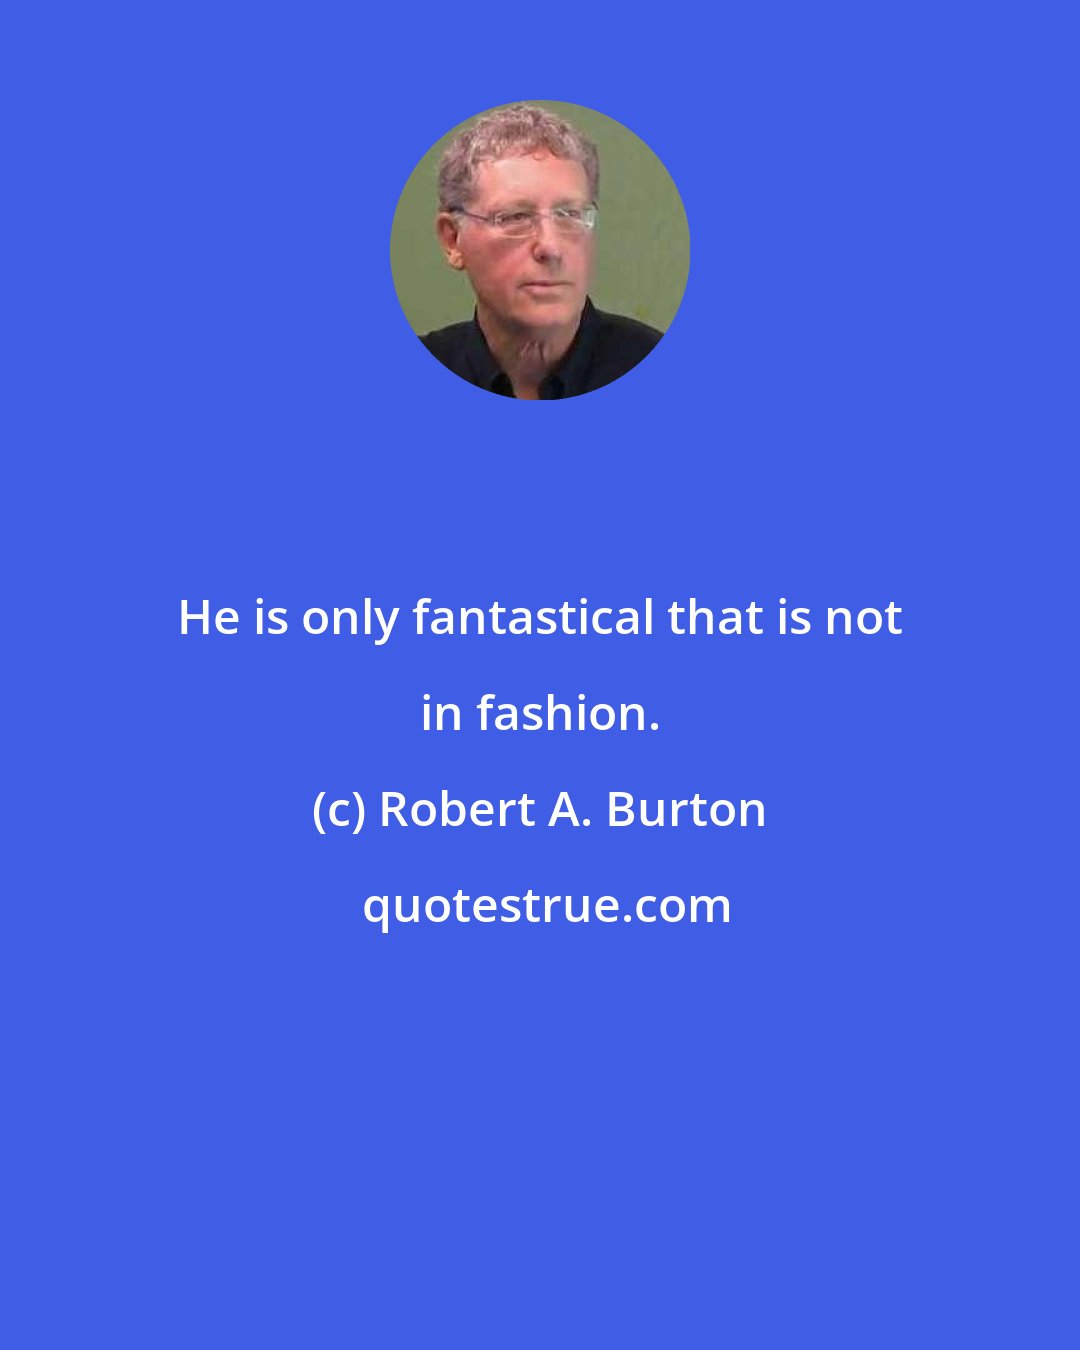 Robert A. Burton: He is only fantastical that is not in fashion.